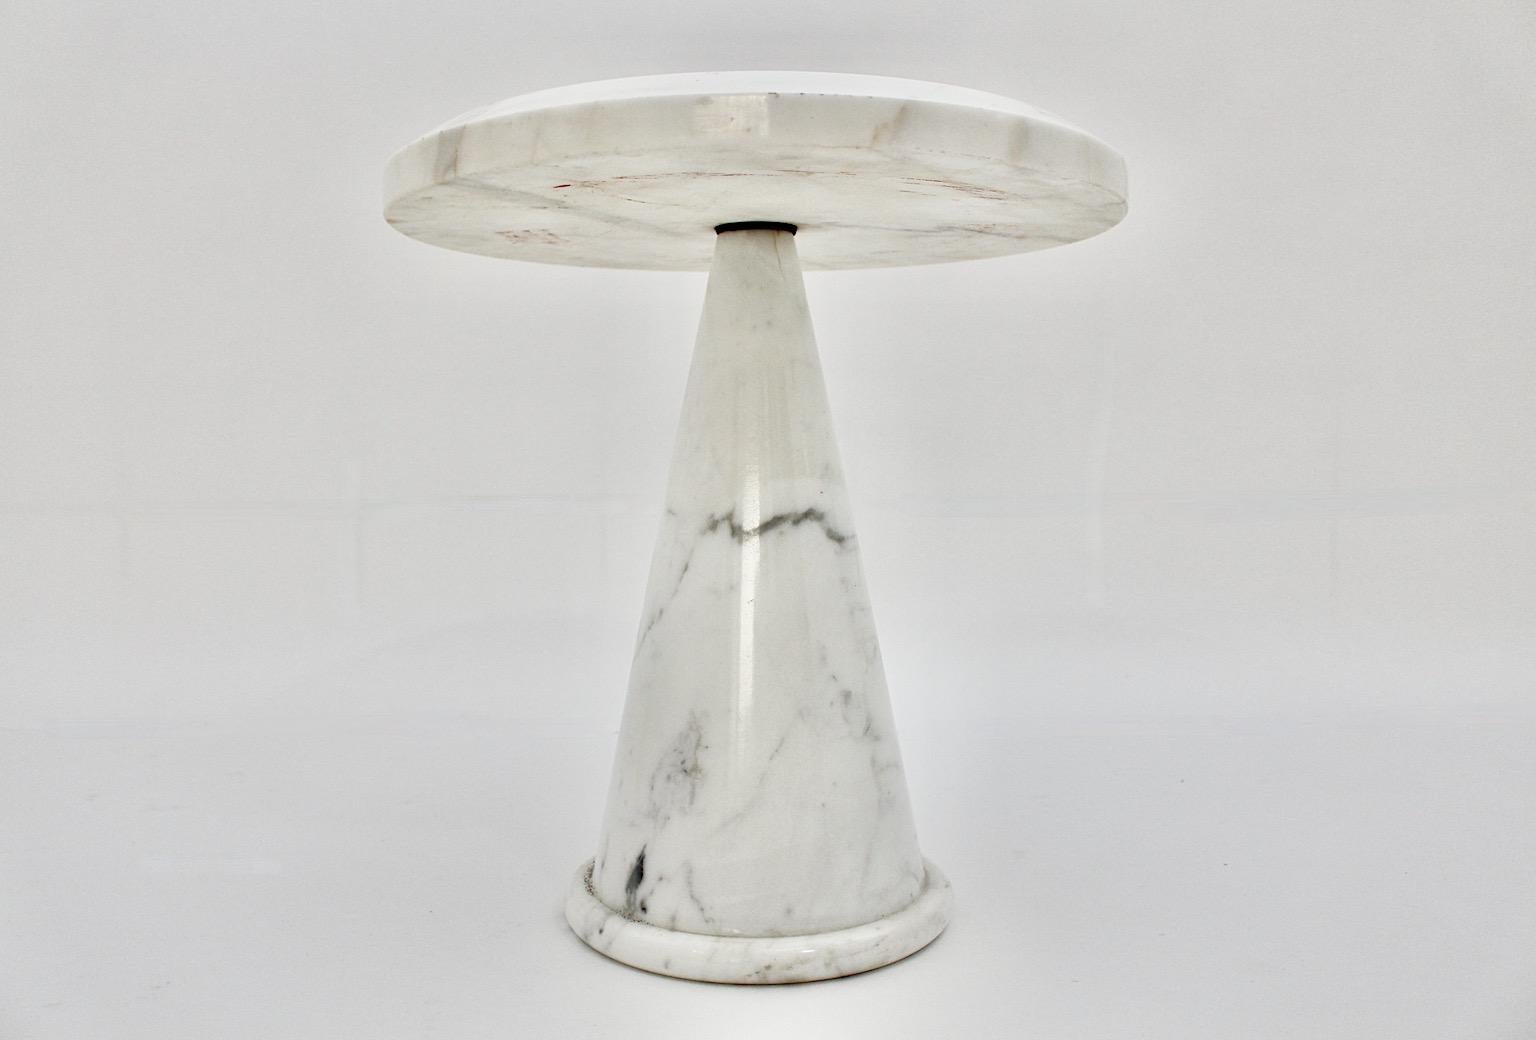 Marble White vintage circular organic side table or coffee table style of 
Angelo Mangiarotti circa 1970 Italy.
A beautiful vintage side table or coffee table from white marble with brown sprinkles with a circular top and a framed conical